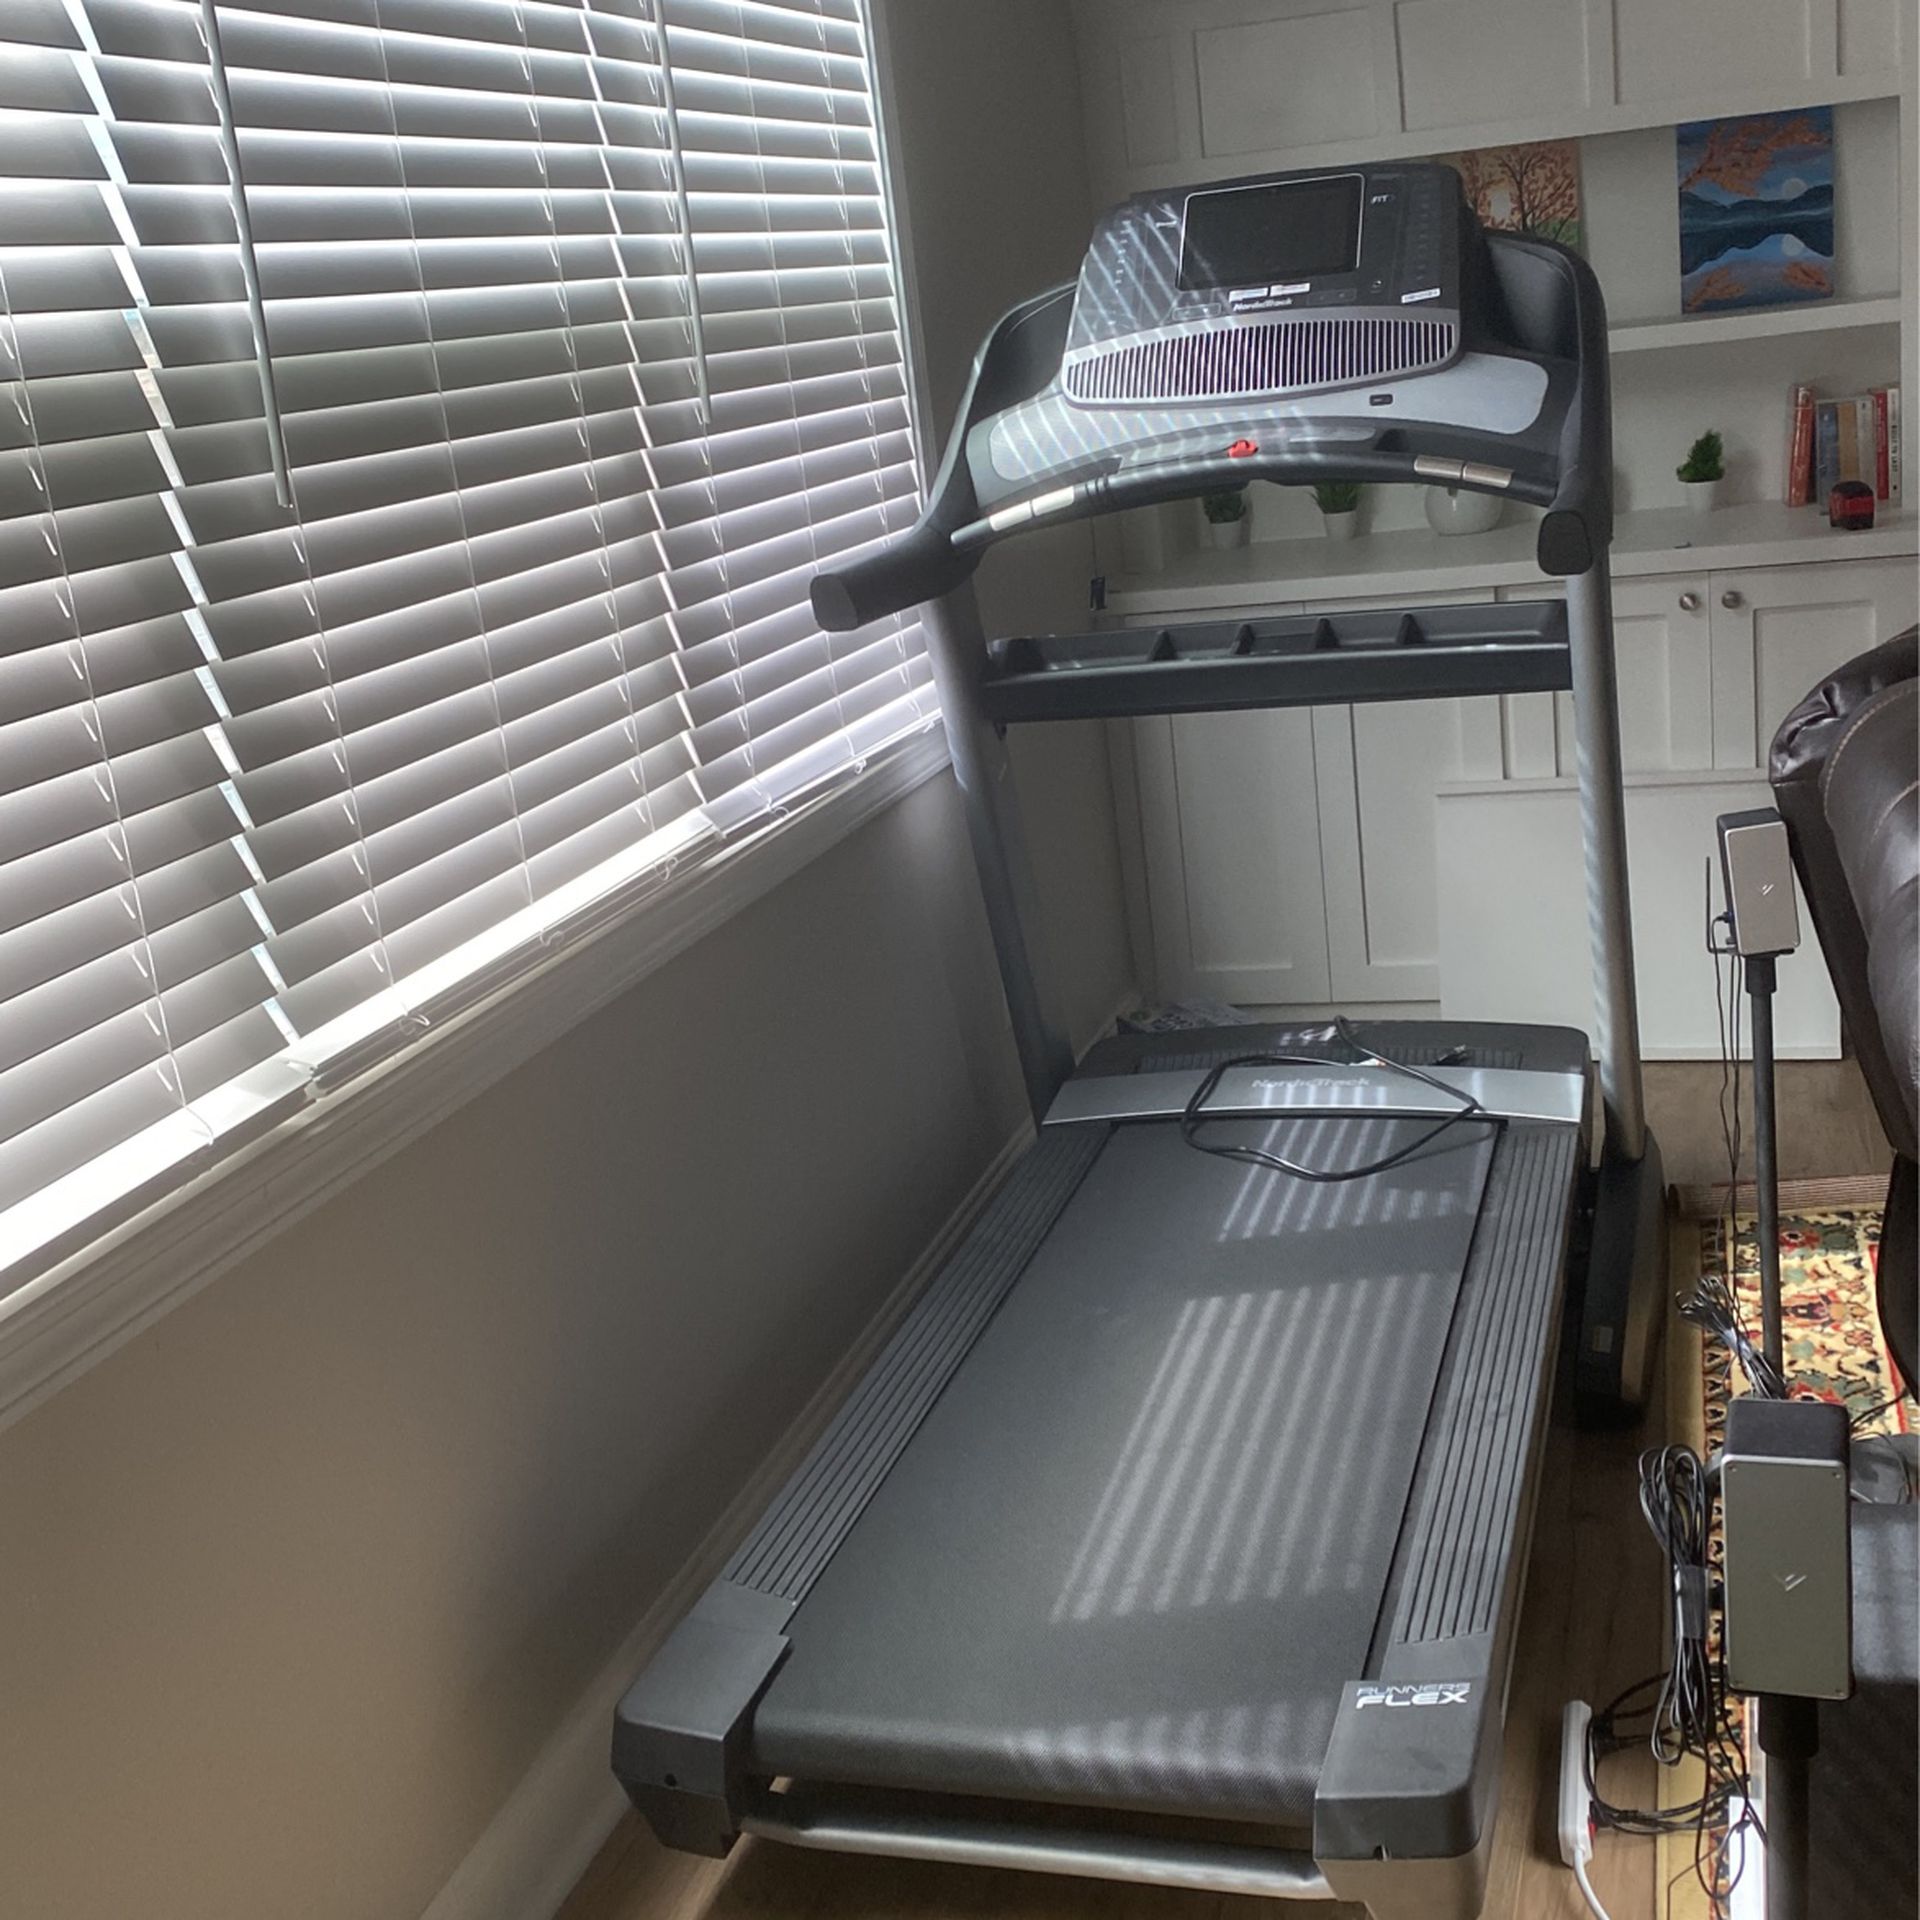 New NordicTrack Treadmill - Move Out Sale!